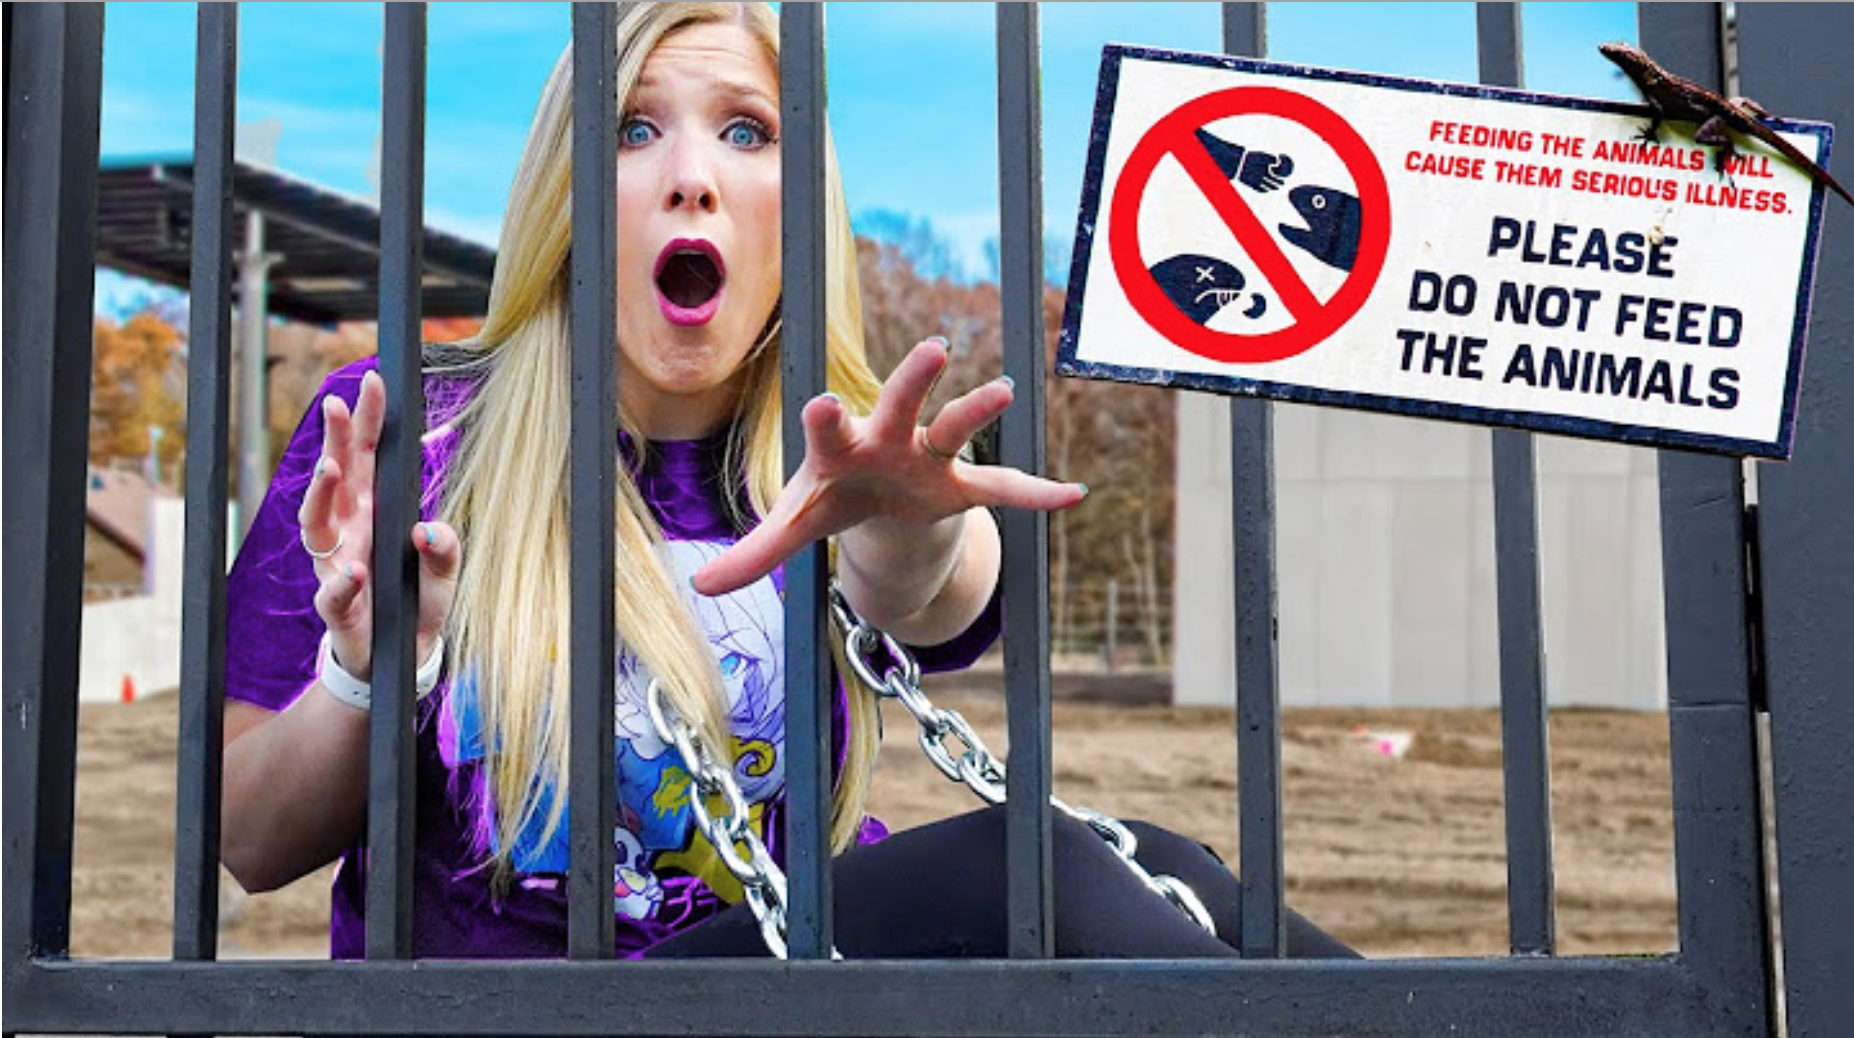 Brianna behind bars with a sign saying 'do not feed the animals'